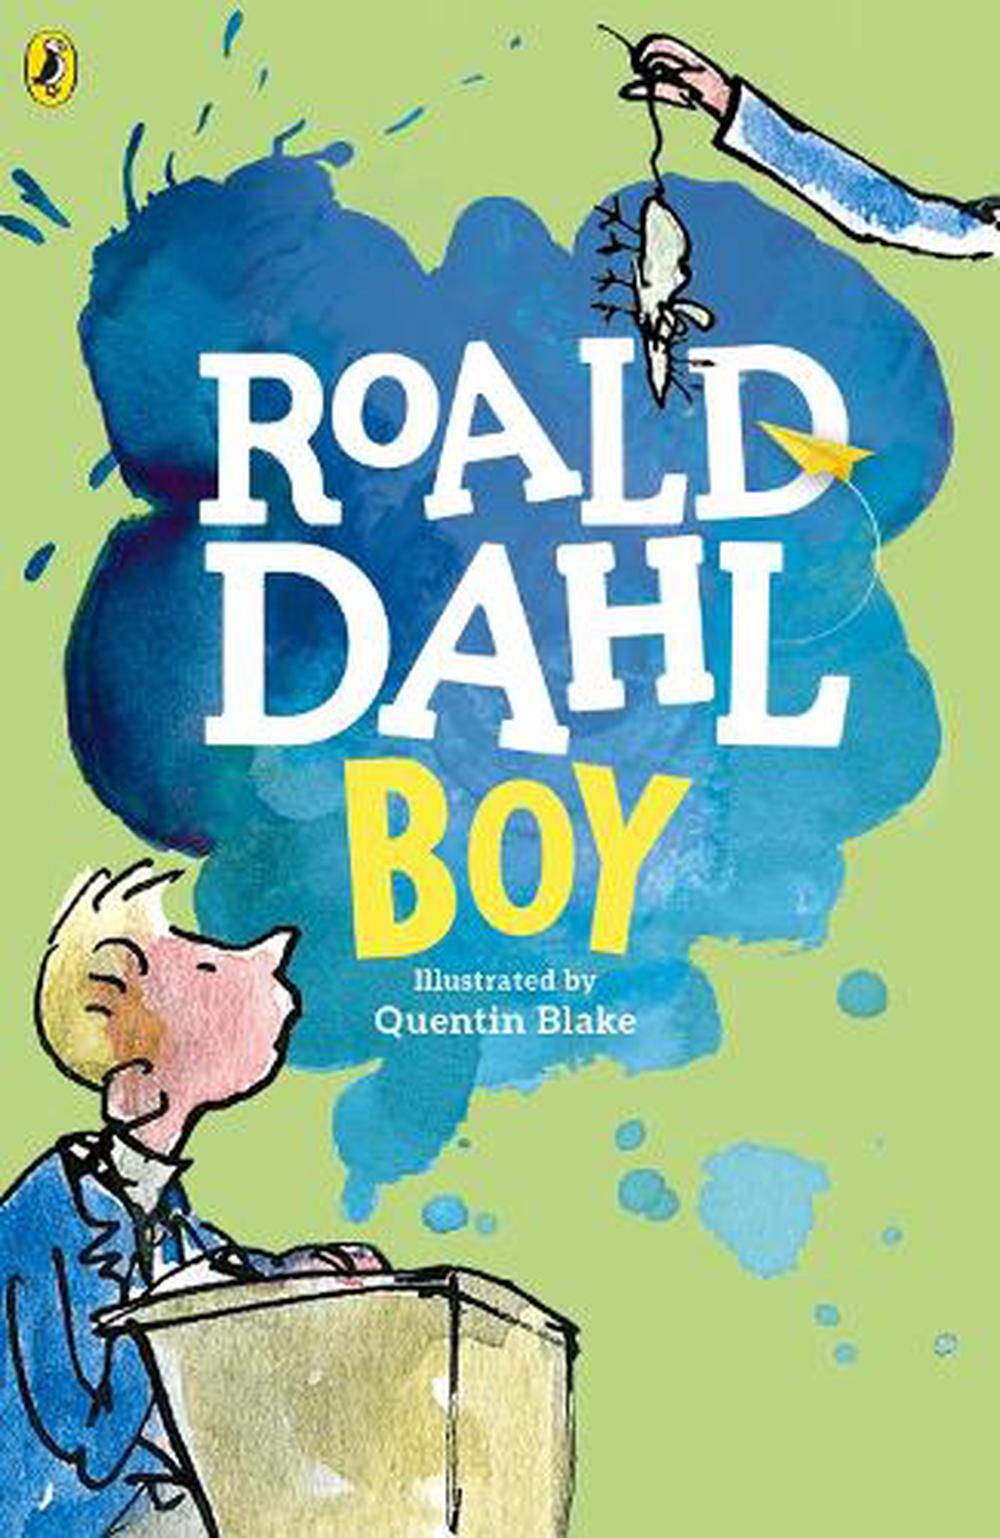 Boy by Roald Dahl, Paperback, 9780141365534 | Buy online at The Nile